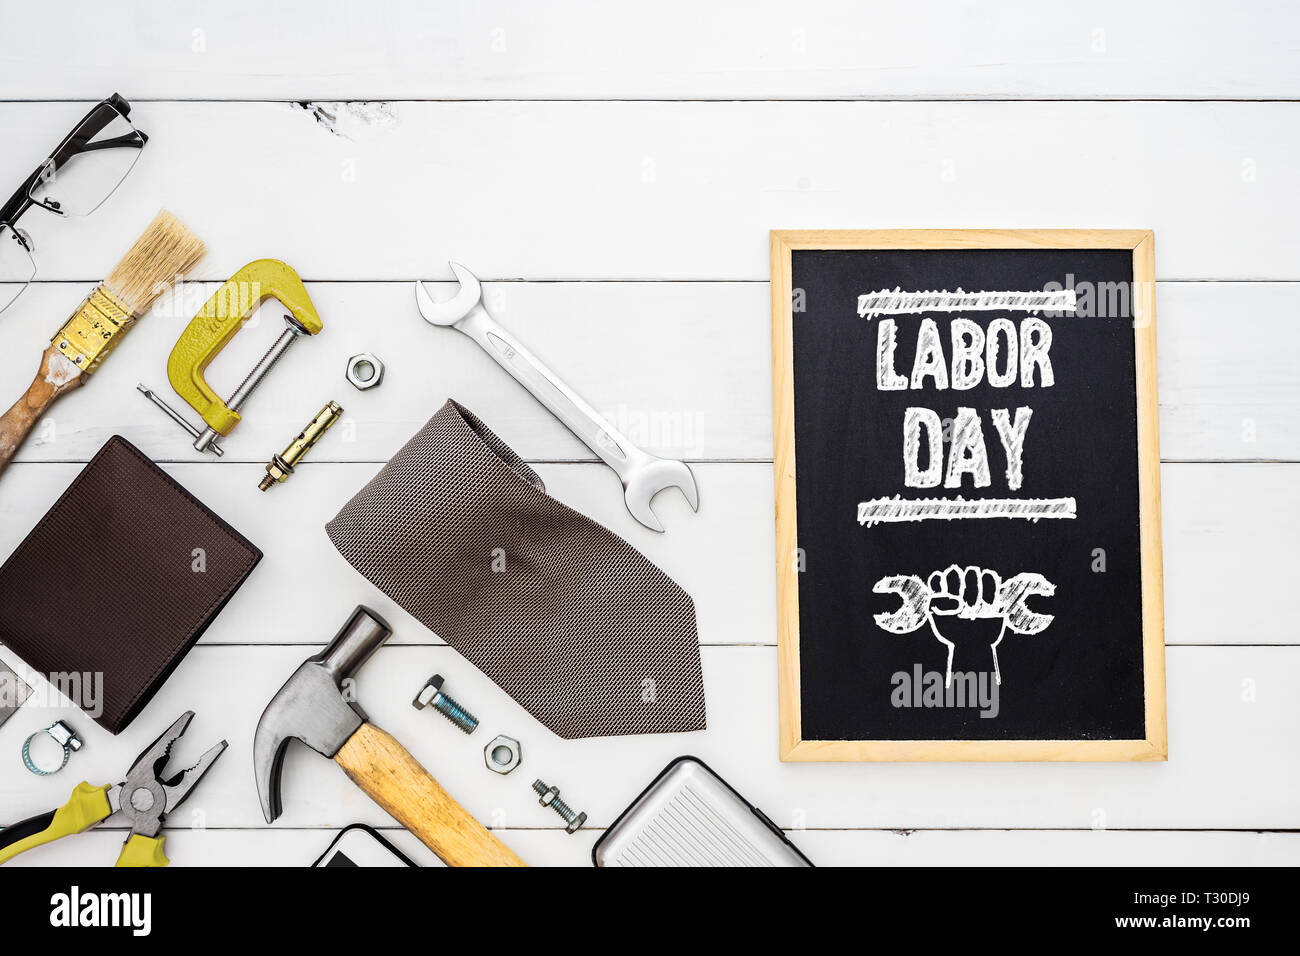 Labor day background concept. Flat lay of construction blue collar handy tools and white collar's accessories over wooden background with black chalkb Stock Photo